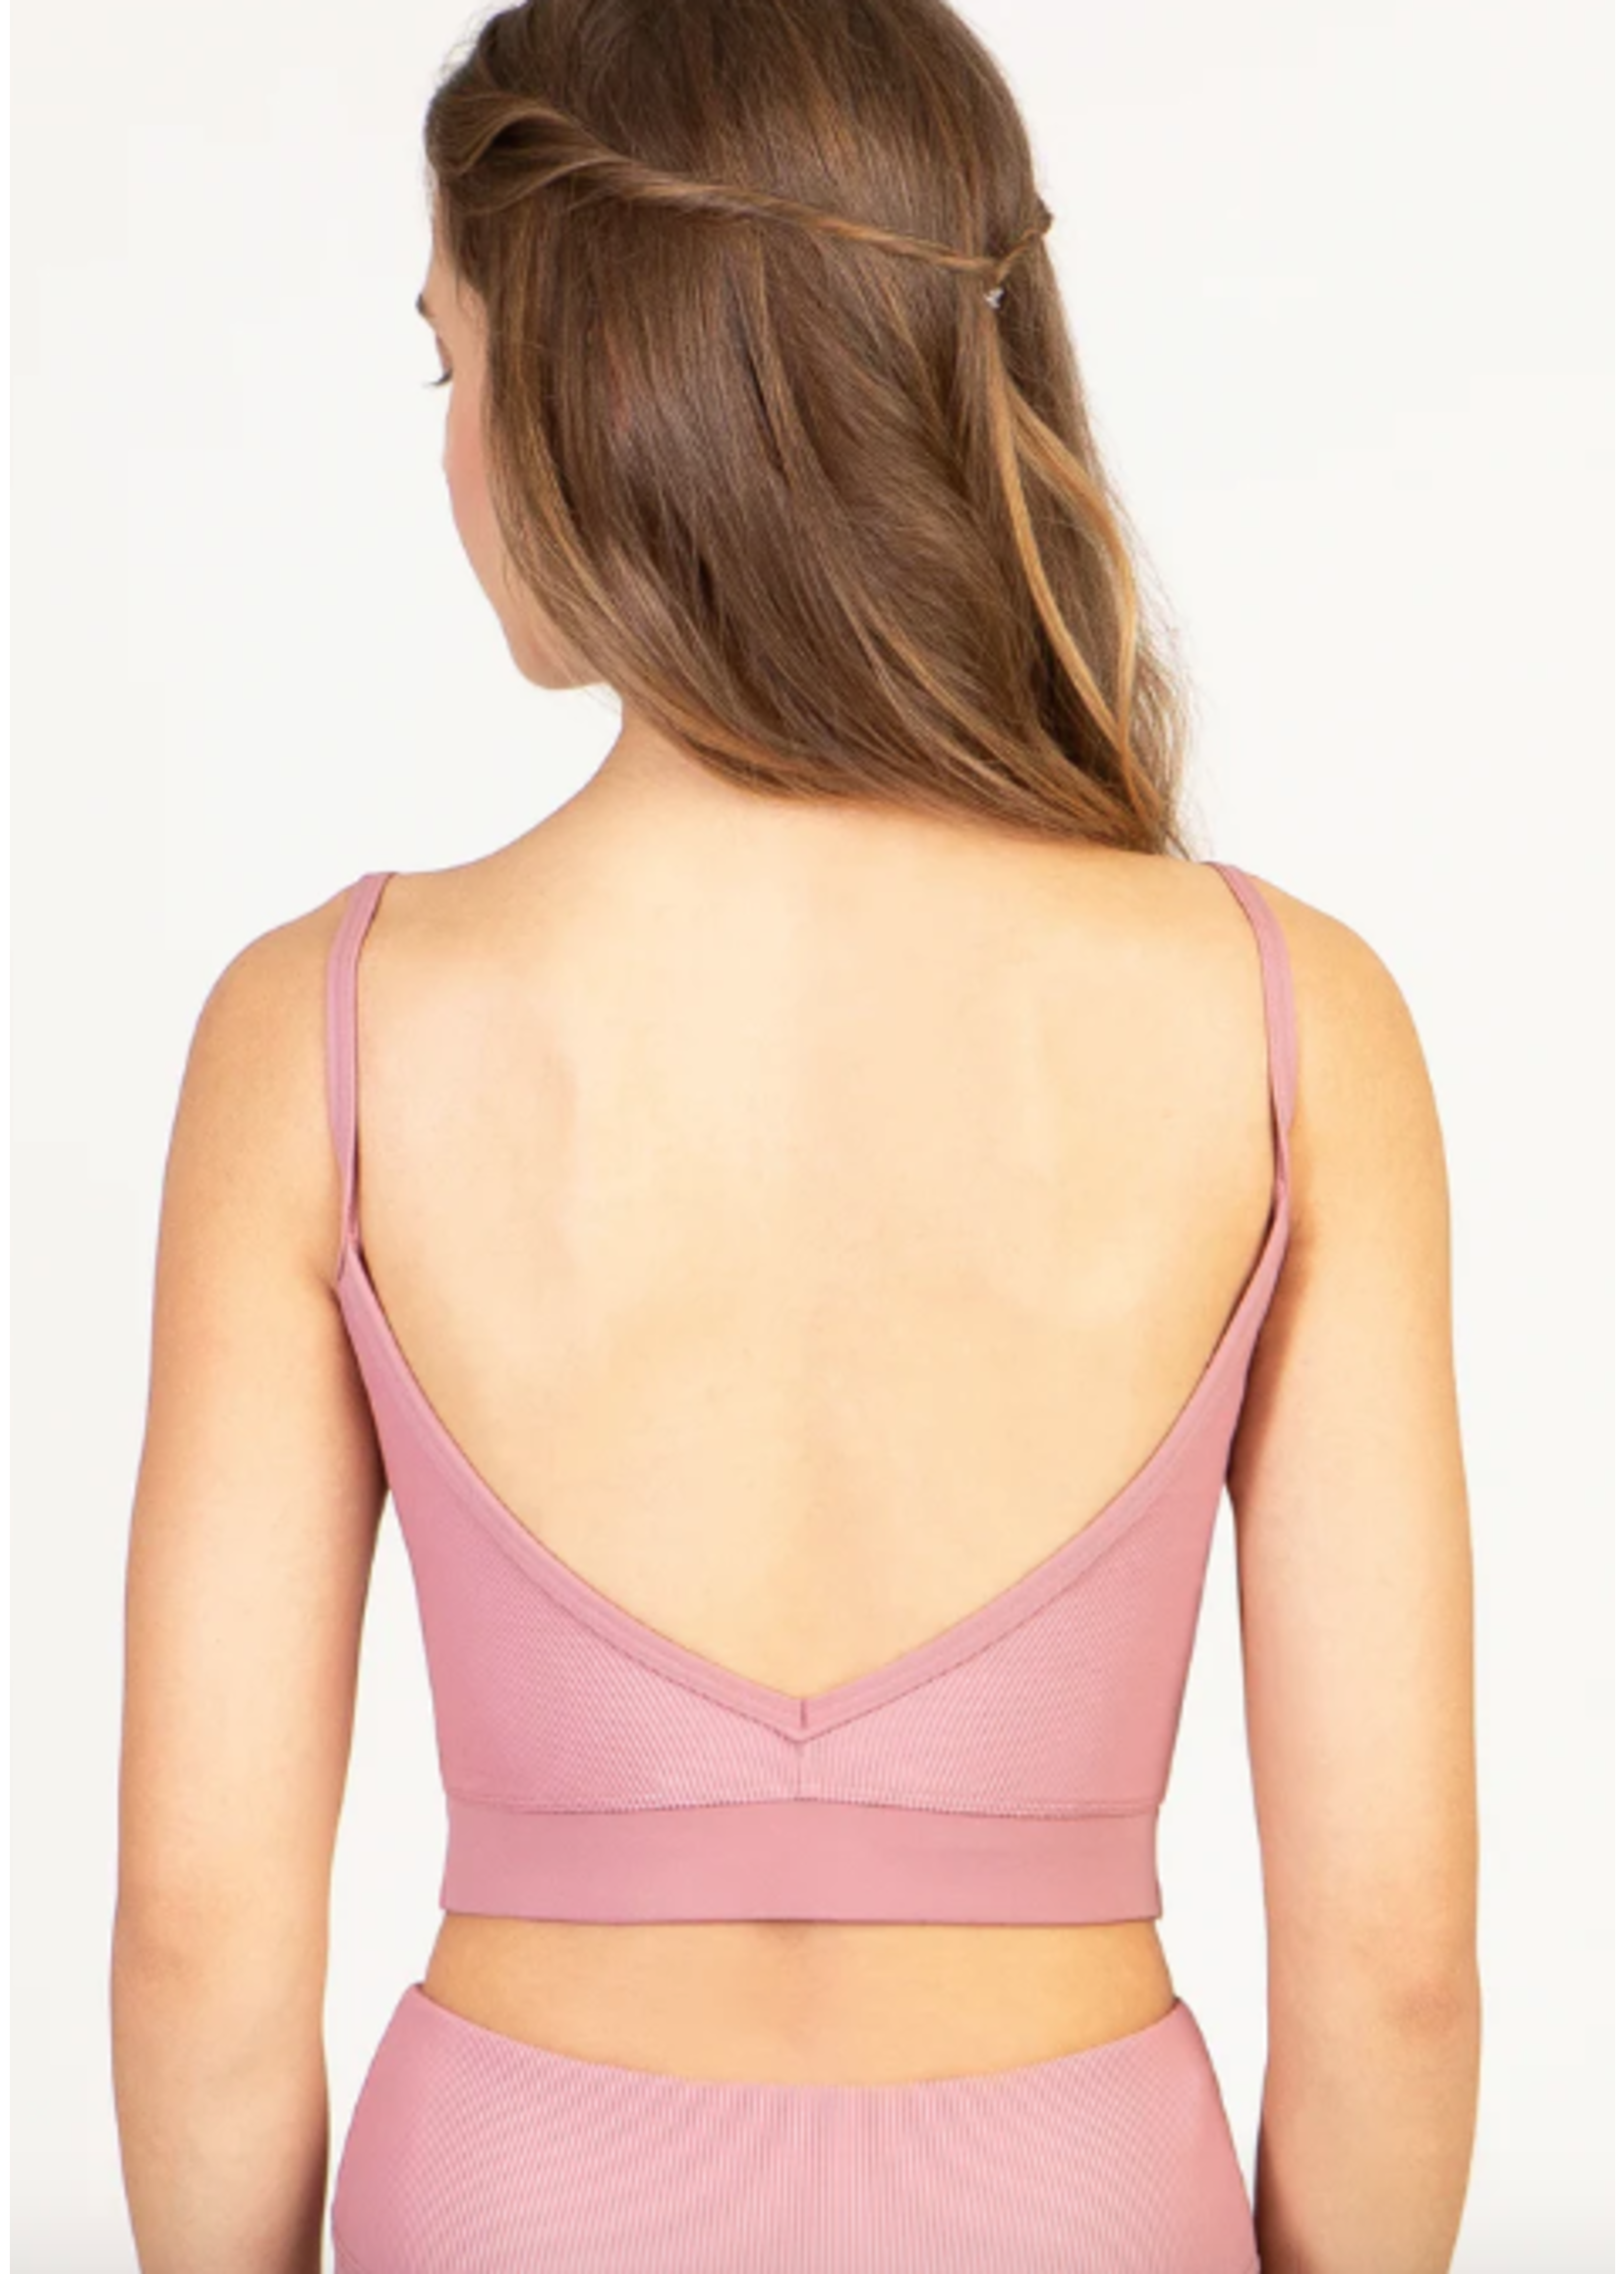 SUFFOLK 4013A CORE RIBBED PANEL CAMISOLE CROP TOP